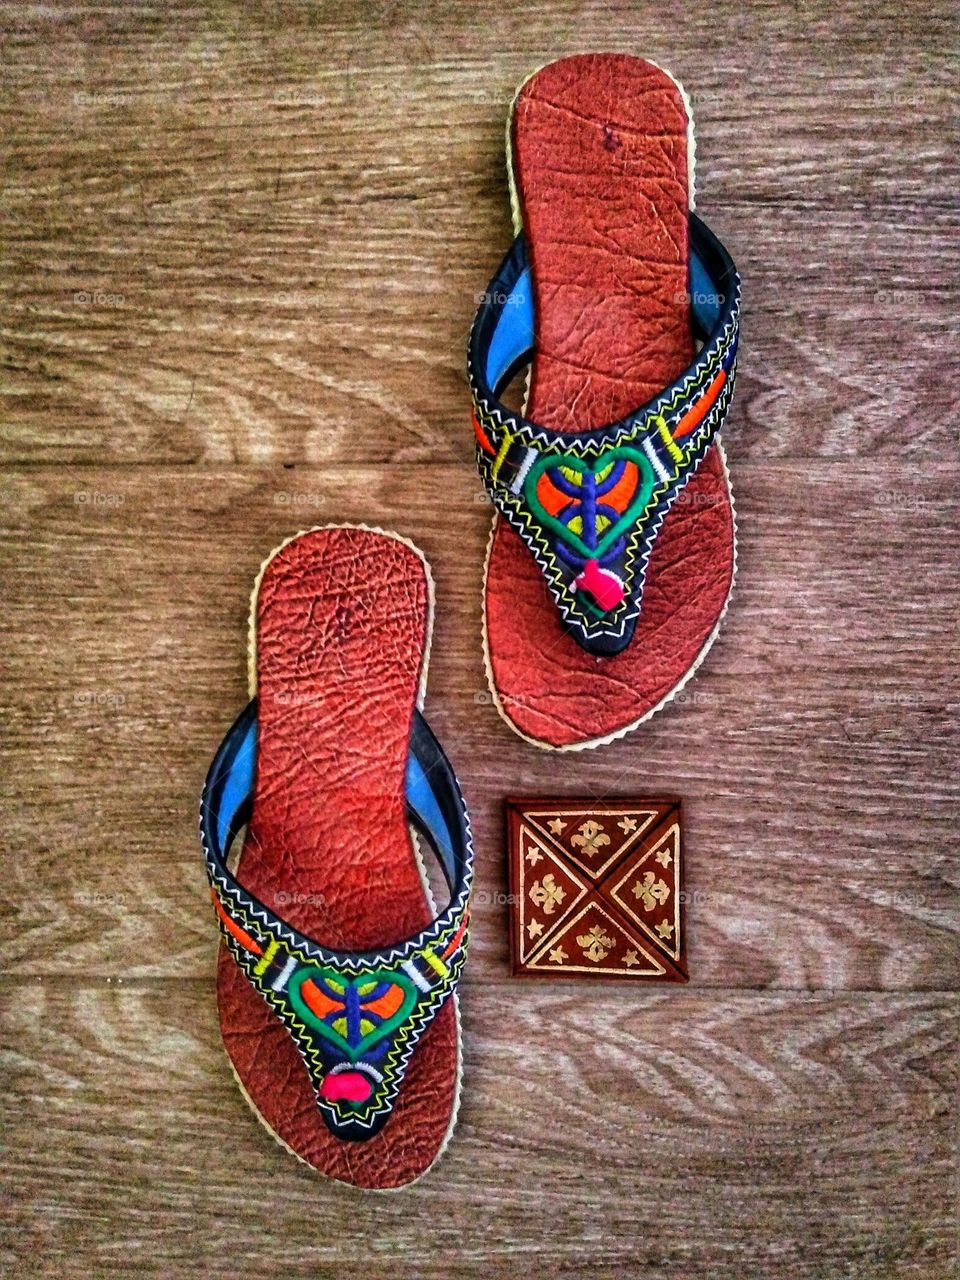 Traditionl moroccan shoes